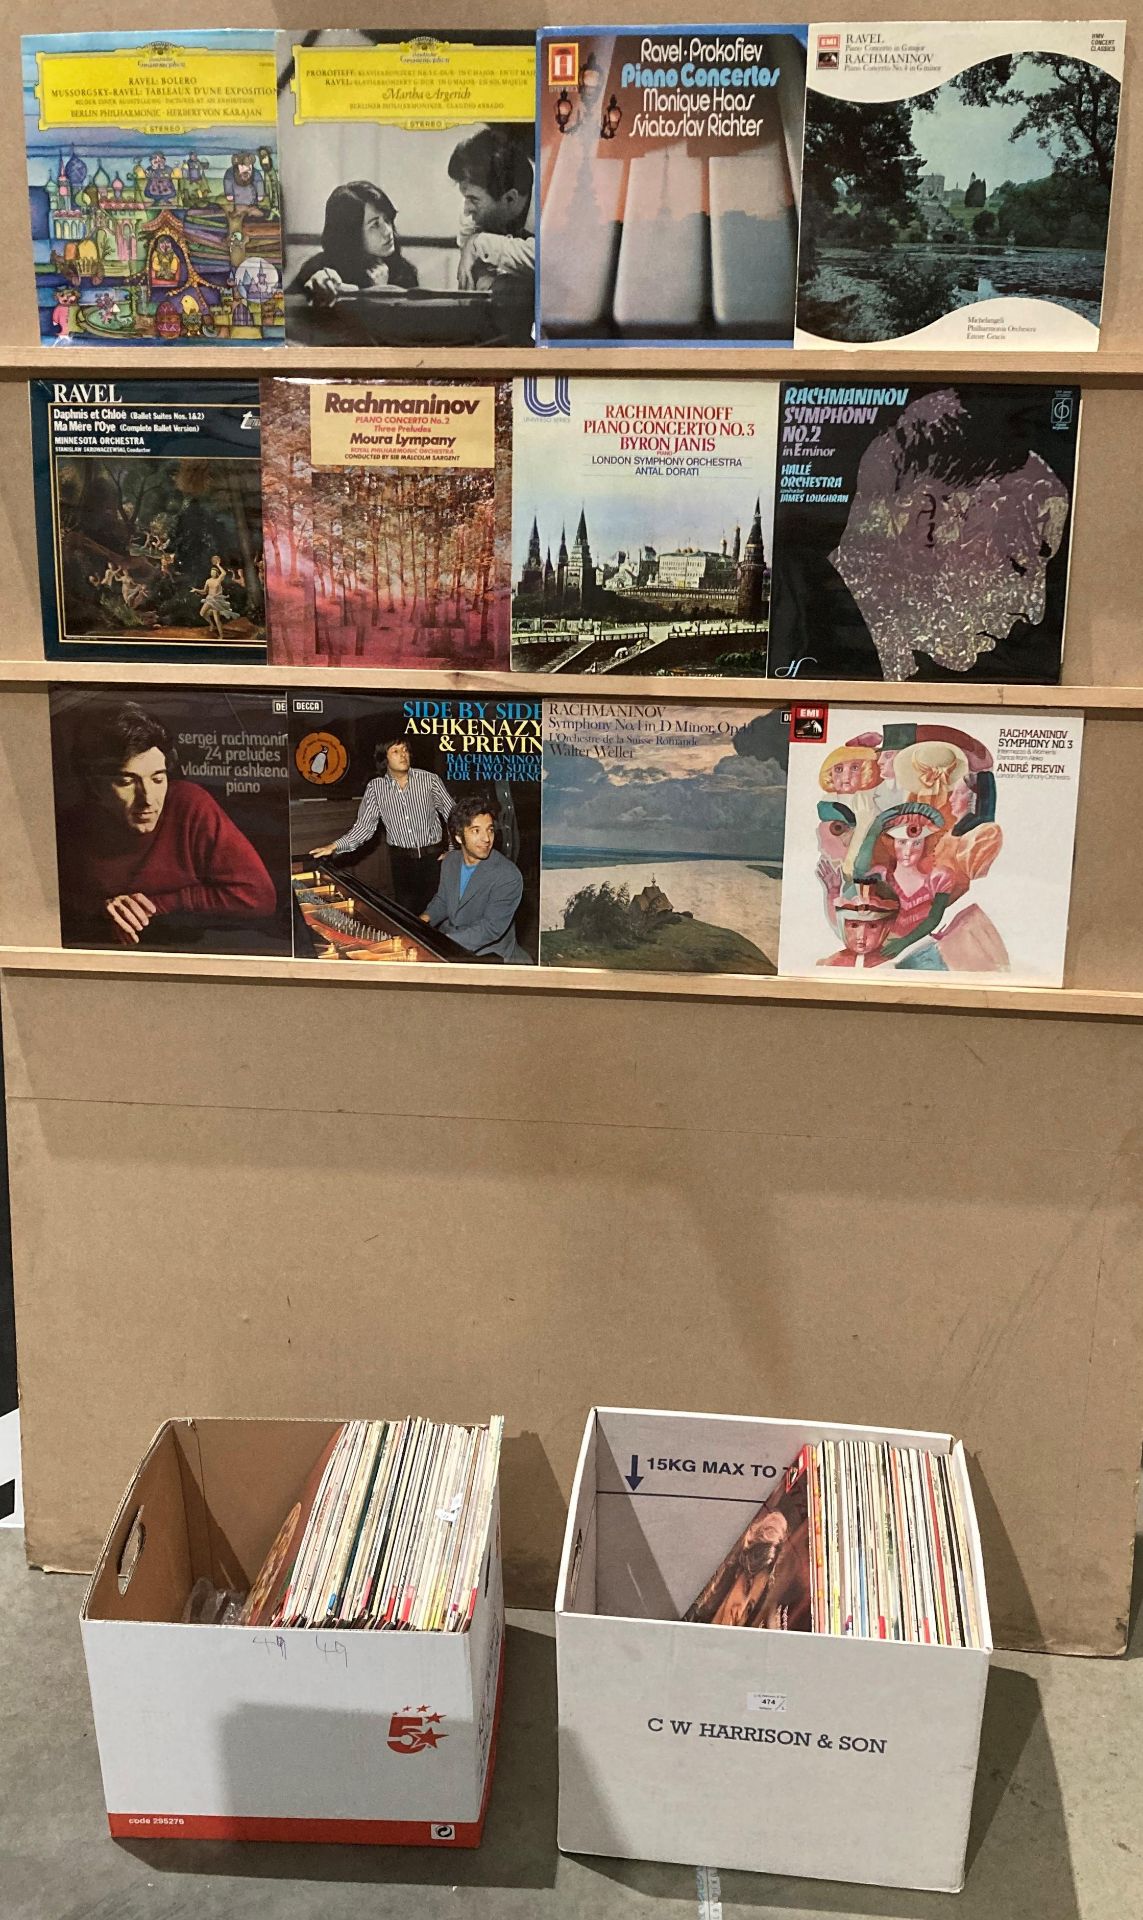 Contents to two boxes - approximately 100 assorted LPs classical music including Mendelson, Hayden,